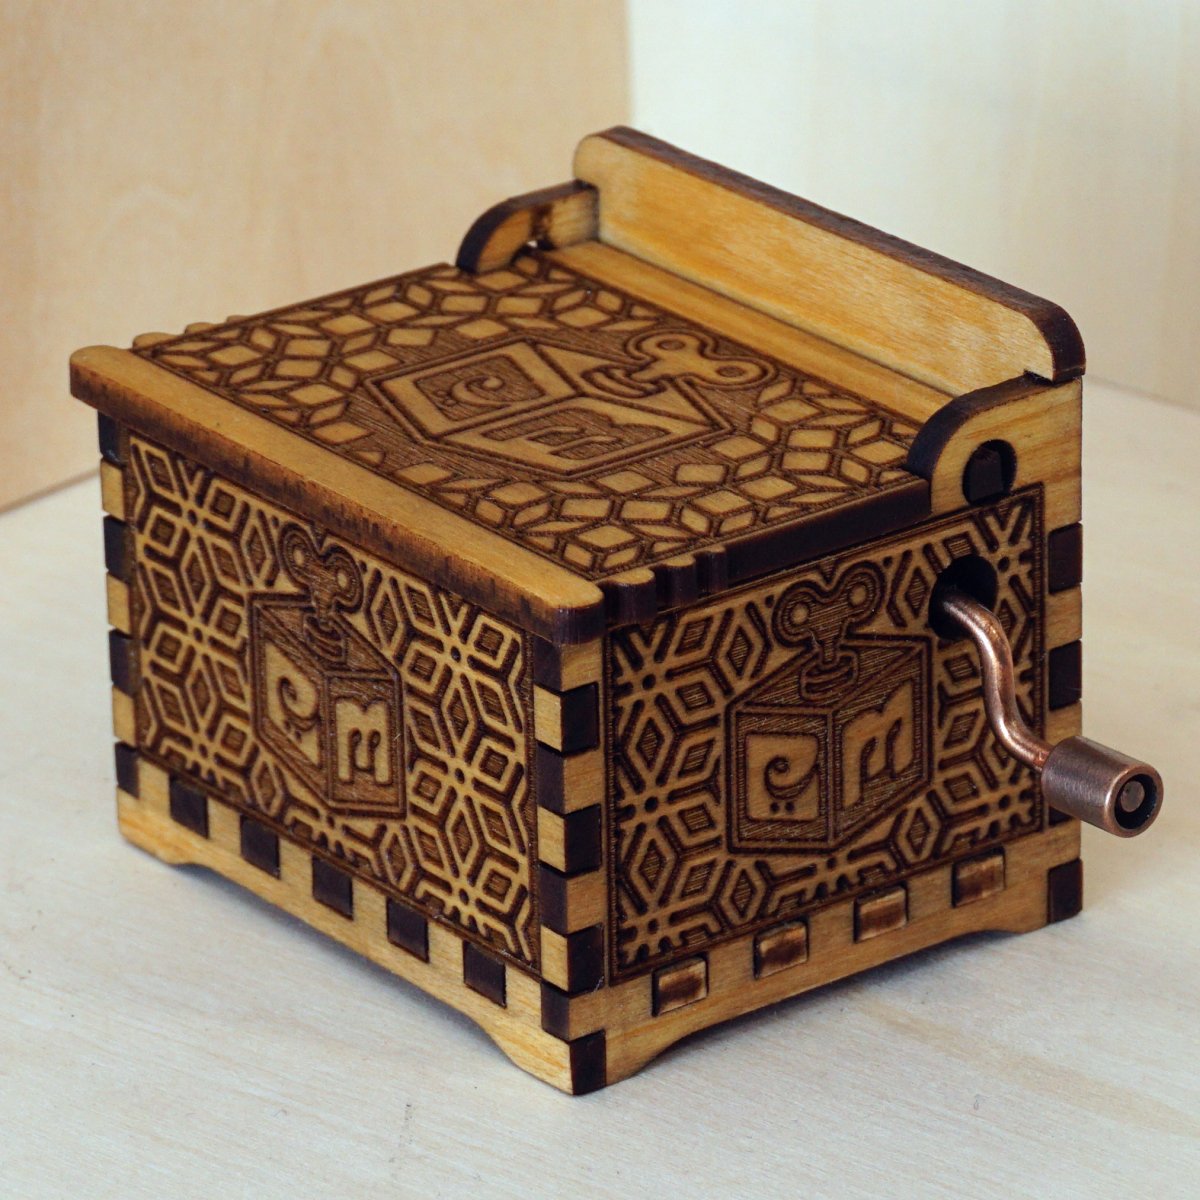 Hand-cranked music box in illustrated cardboard made by Belle